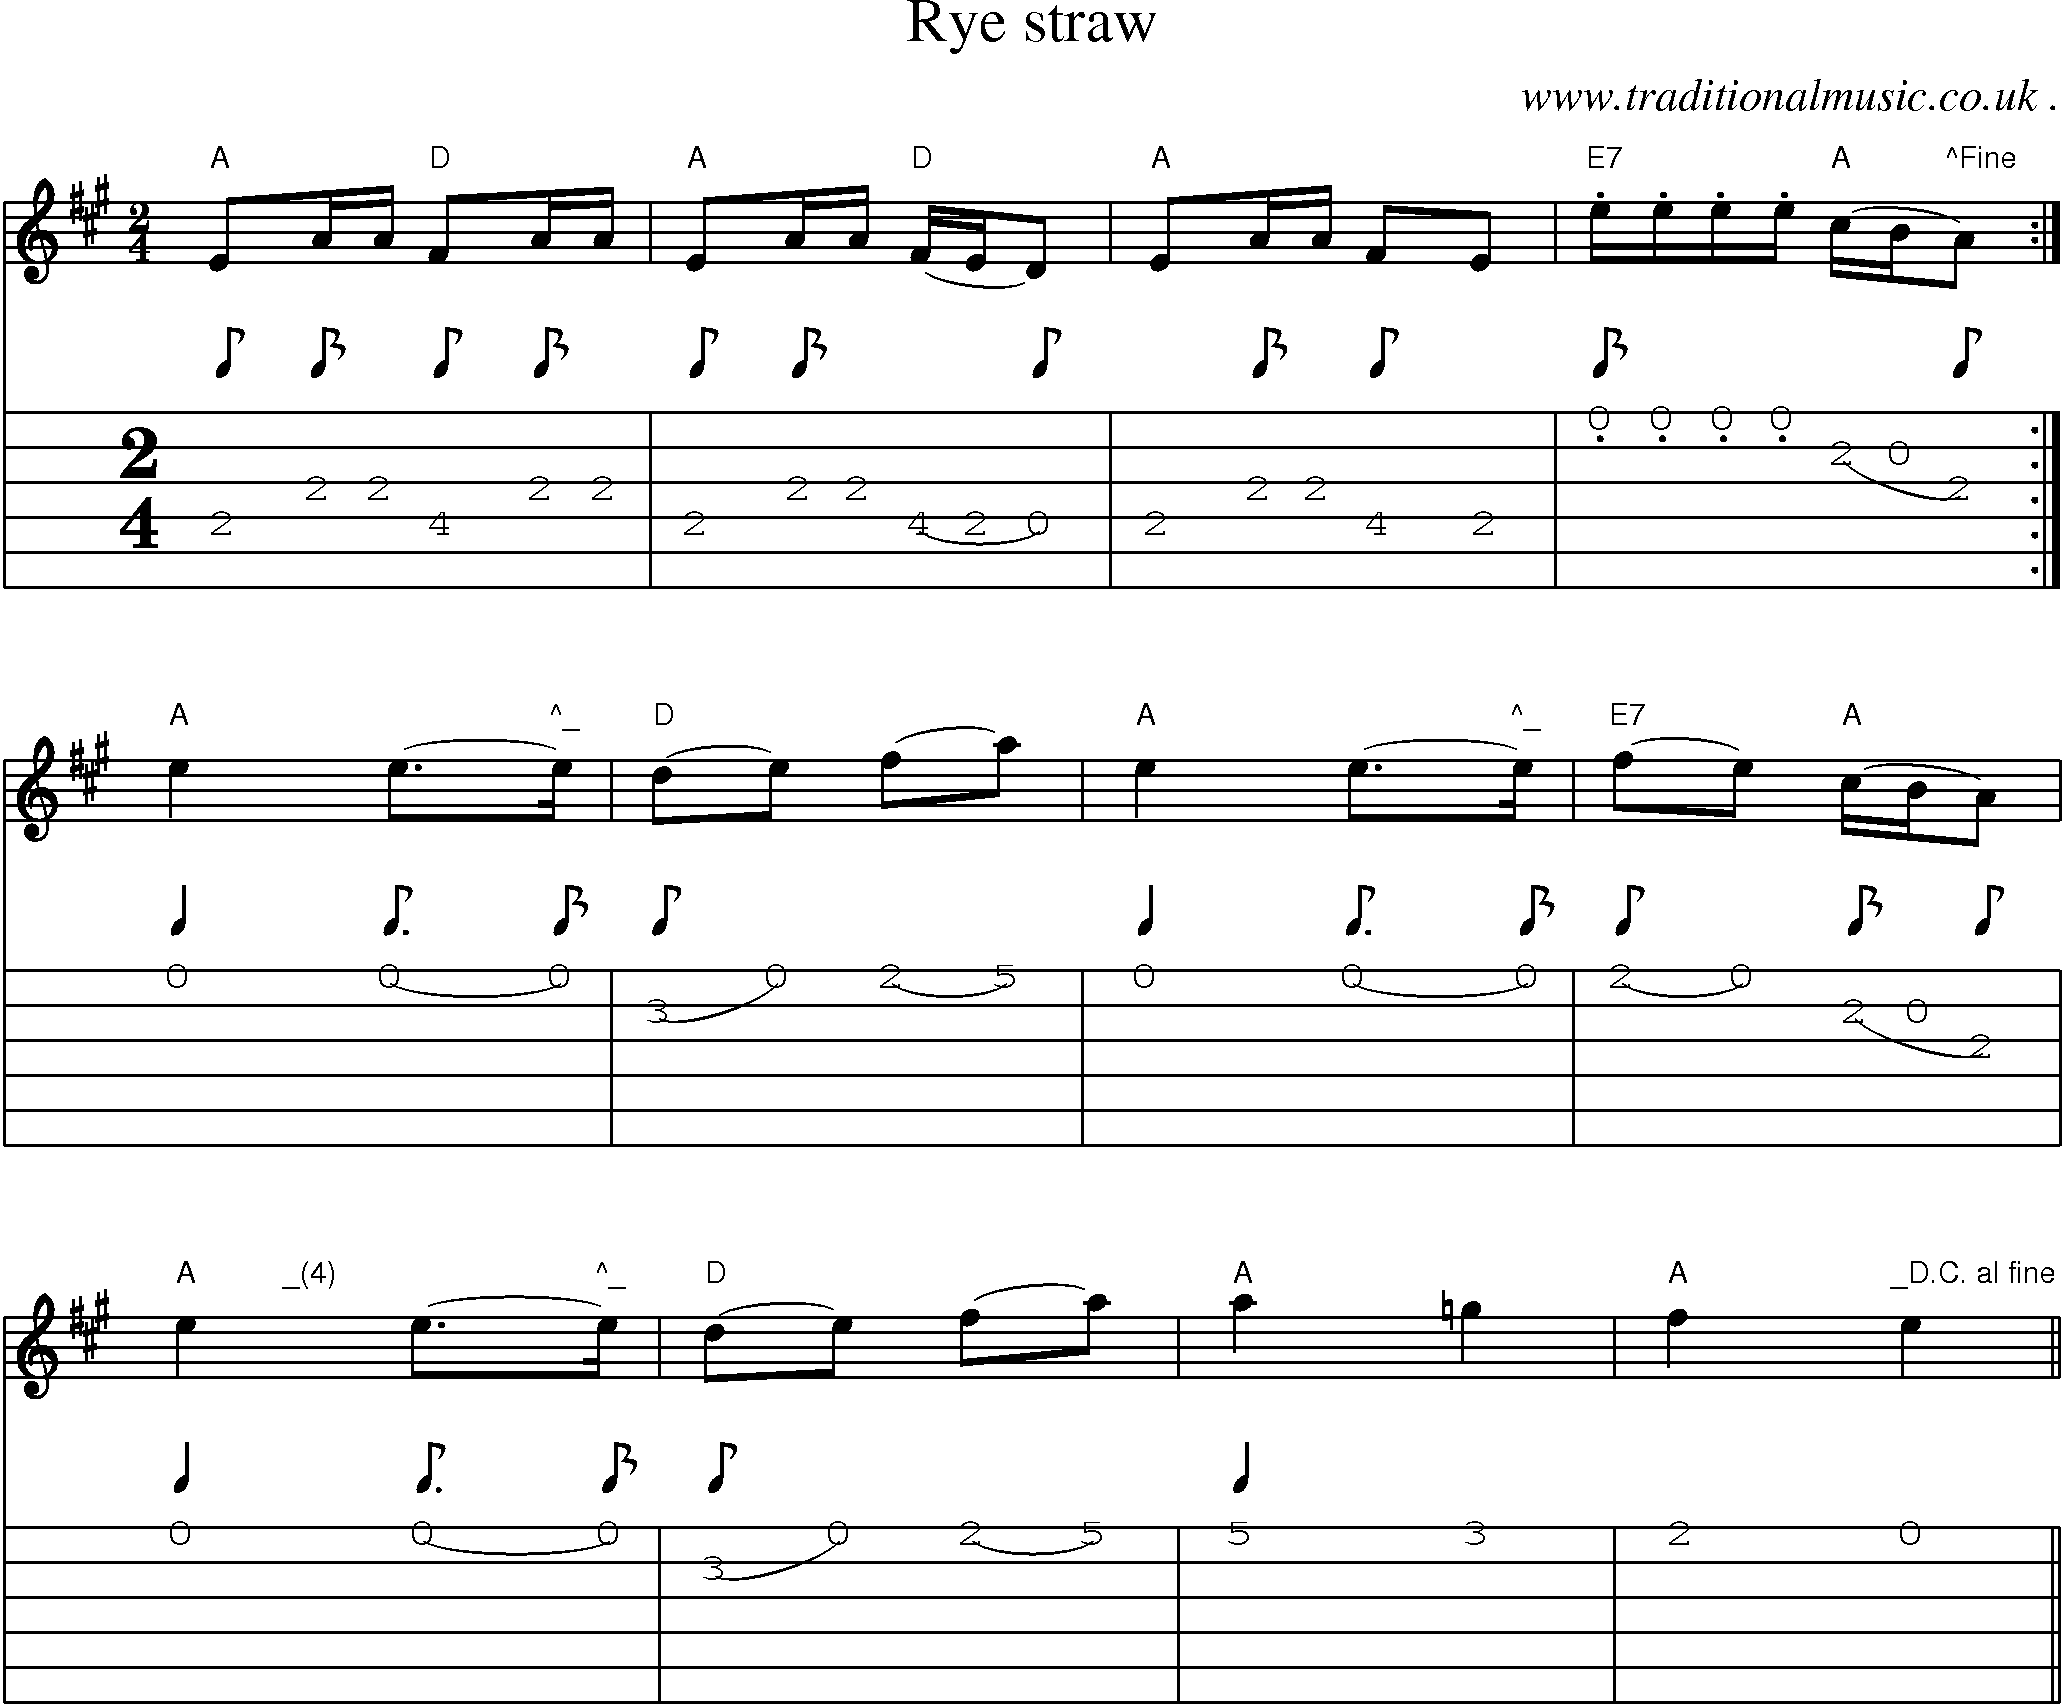 Music Score and Guitar Tabs for Rye Straw